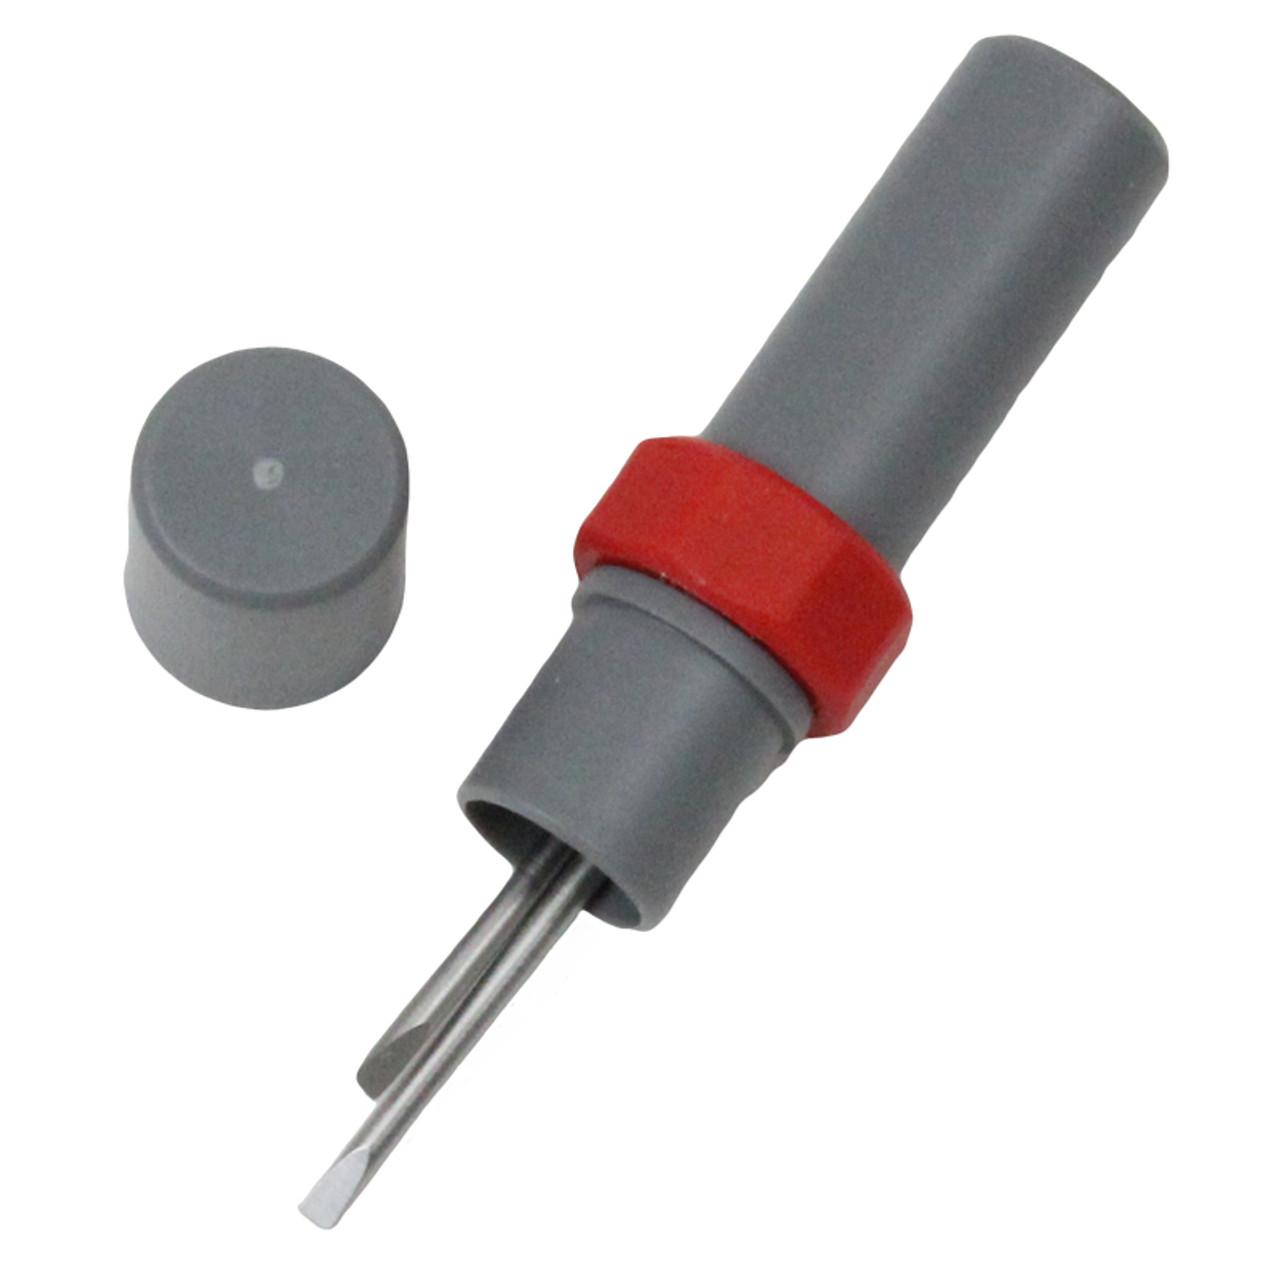 Bergeon 30081-AM10 Mini Watchmakers Stainless Steel Screwdriver